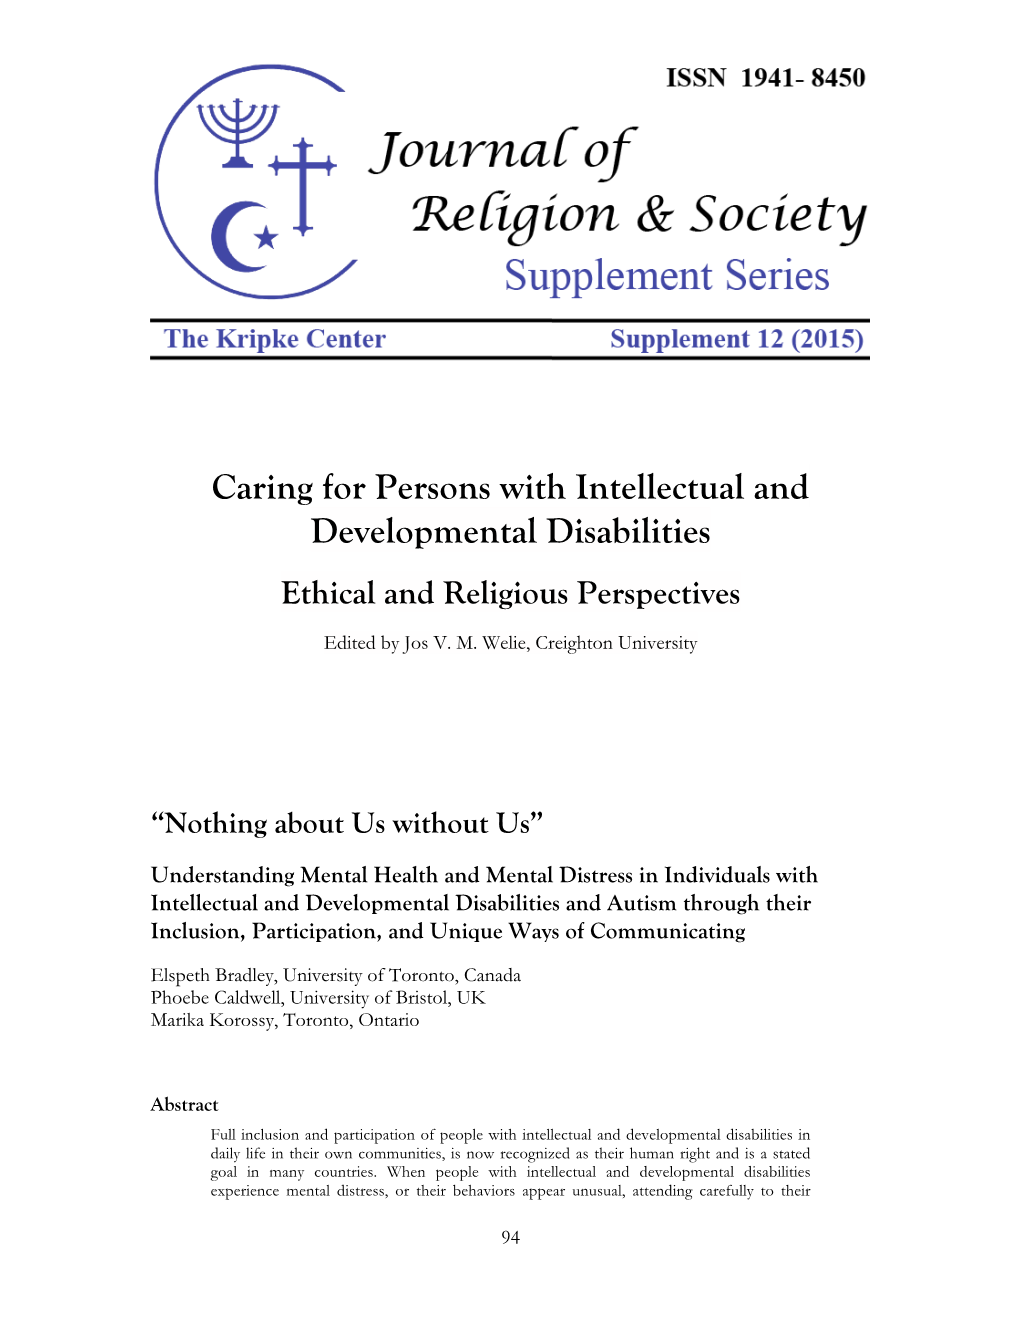 Caring for Persons with Intellectual and Developmental Disabilities Ethical and Religious Perspectives